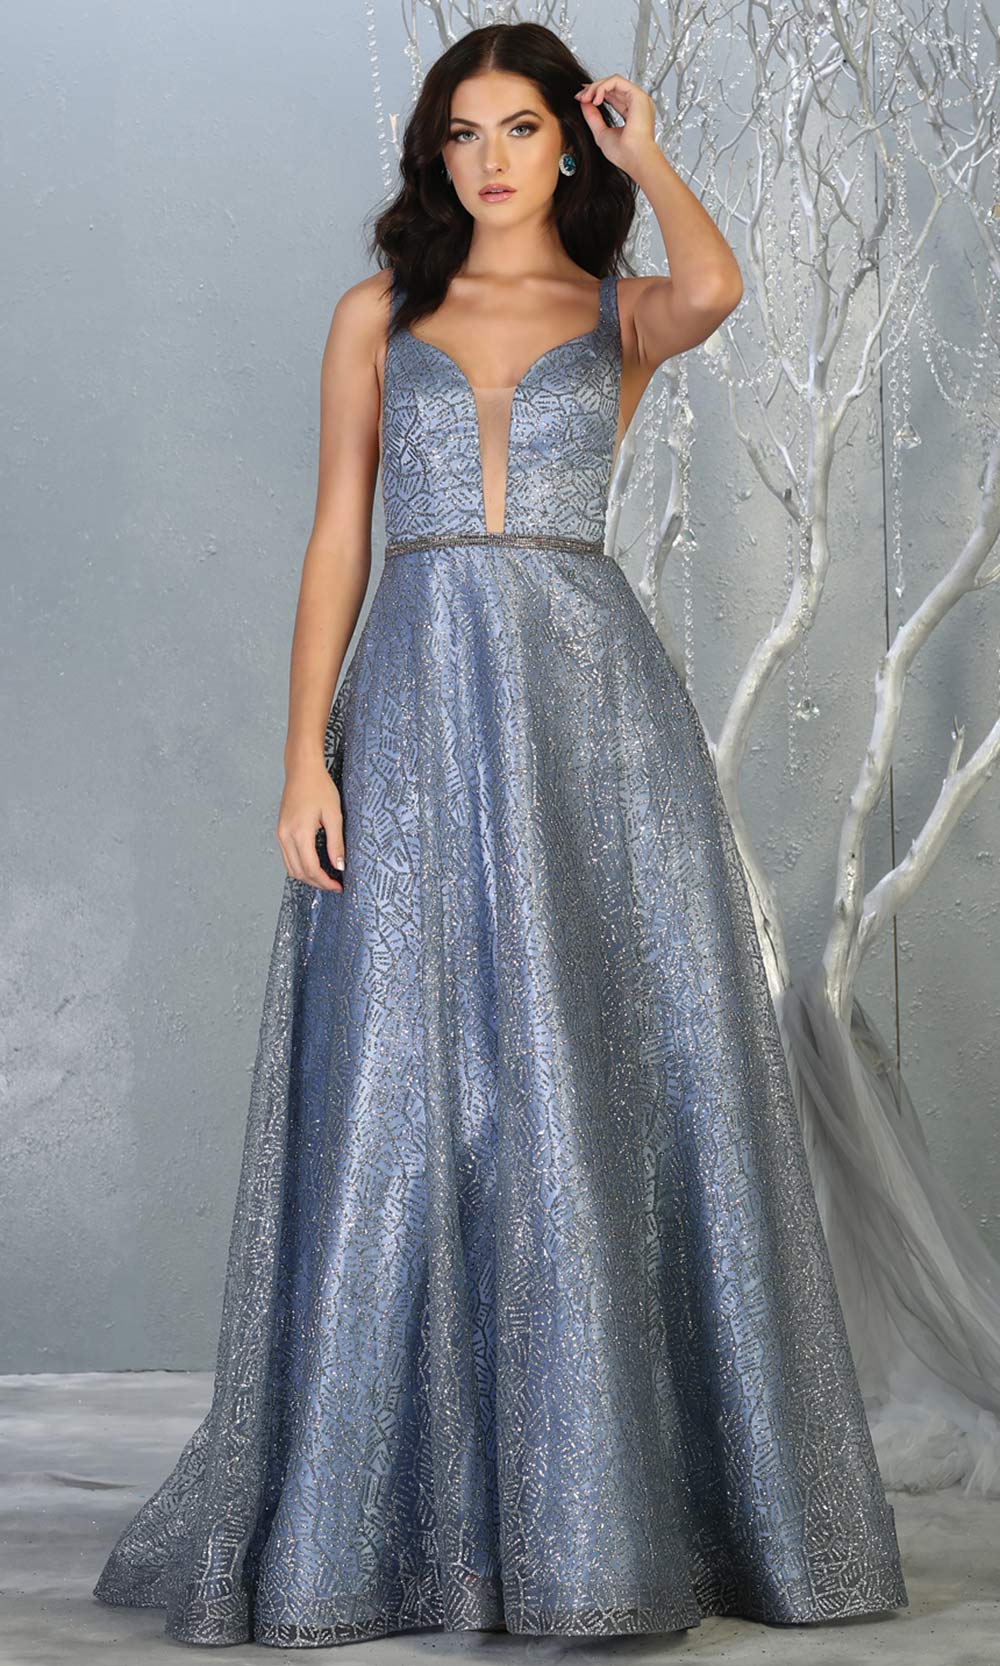 Mayqueen MQ1771 long dusty blue v neck flowy glittery sequin dress with low back. Perfect for prom, engagement dress, e-shoot dress, formal wedding guest dress, debut, quinceanera, sweet 16, gala. Plus sizes avail in this dusty blue semi ballgown.jpg